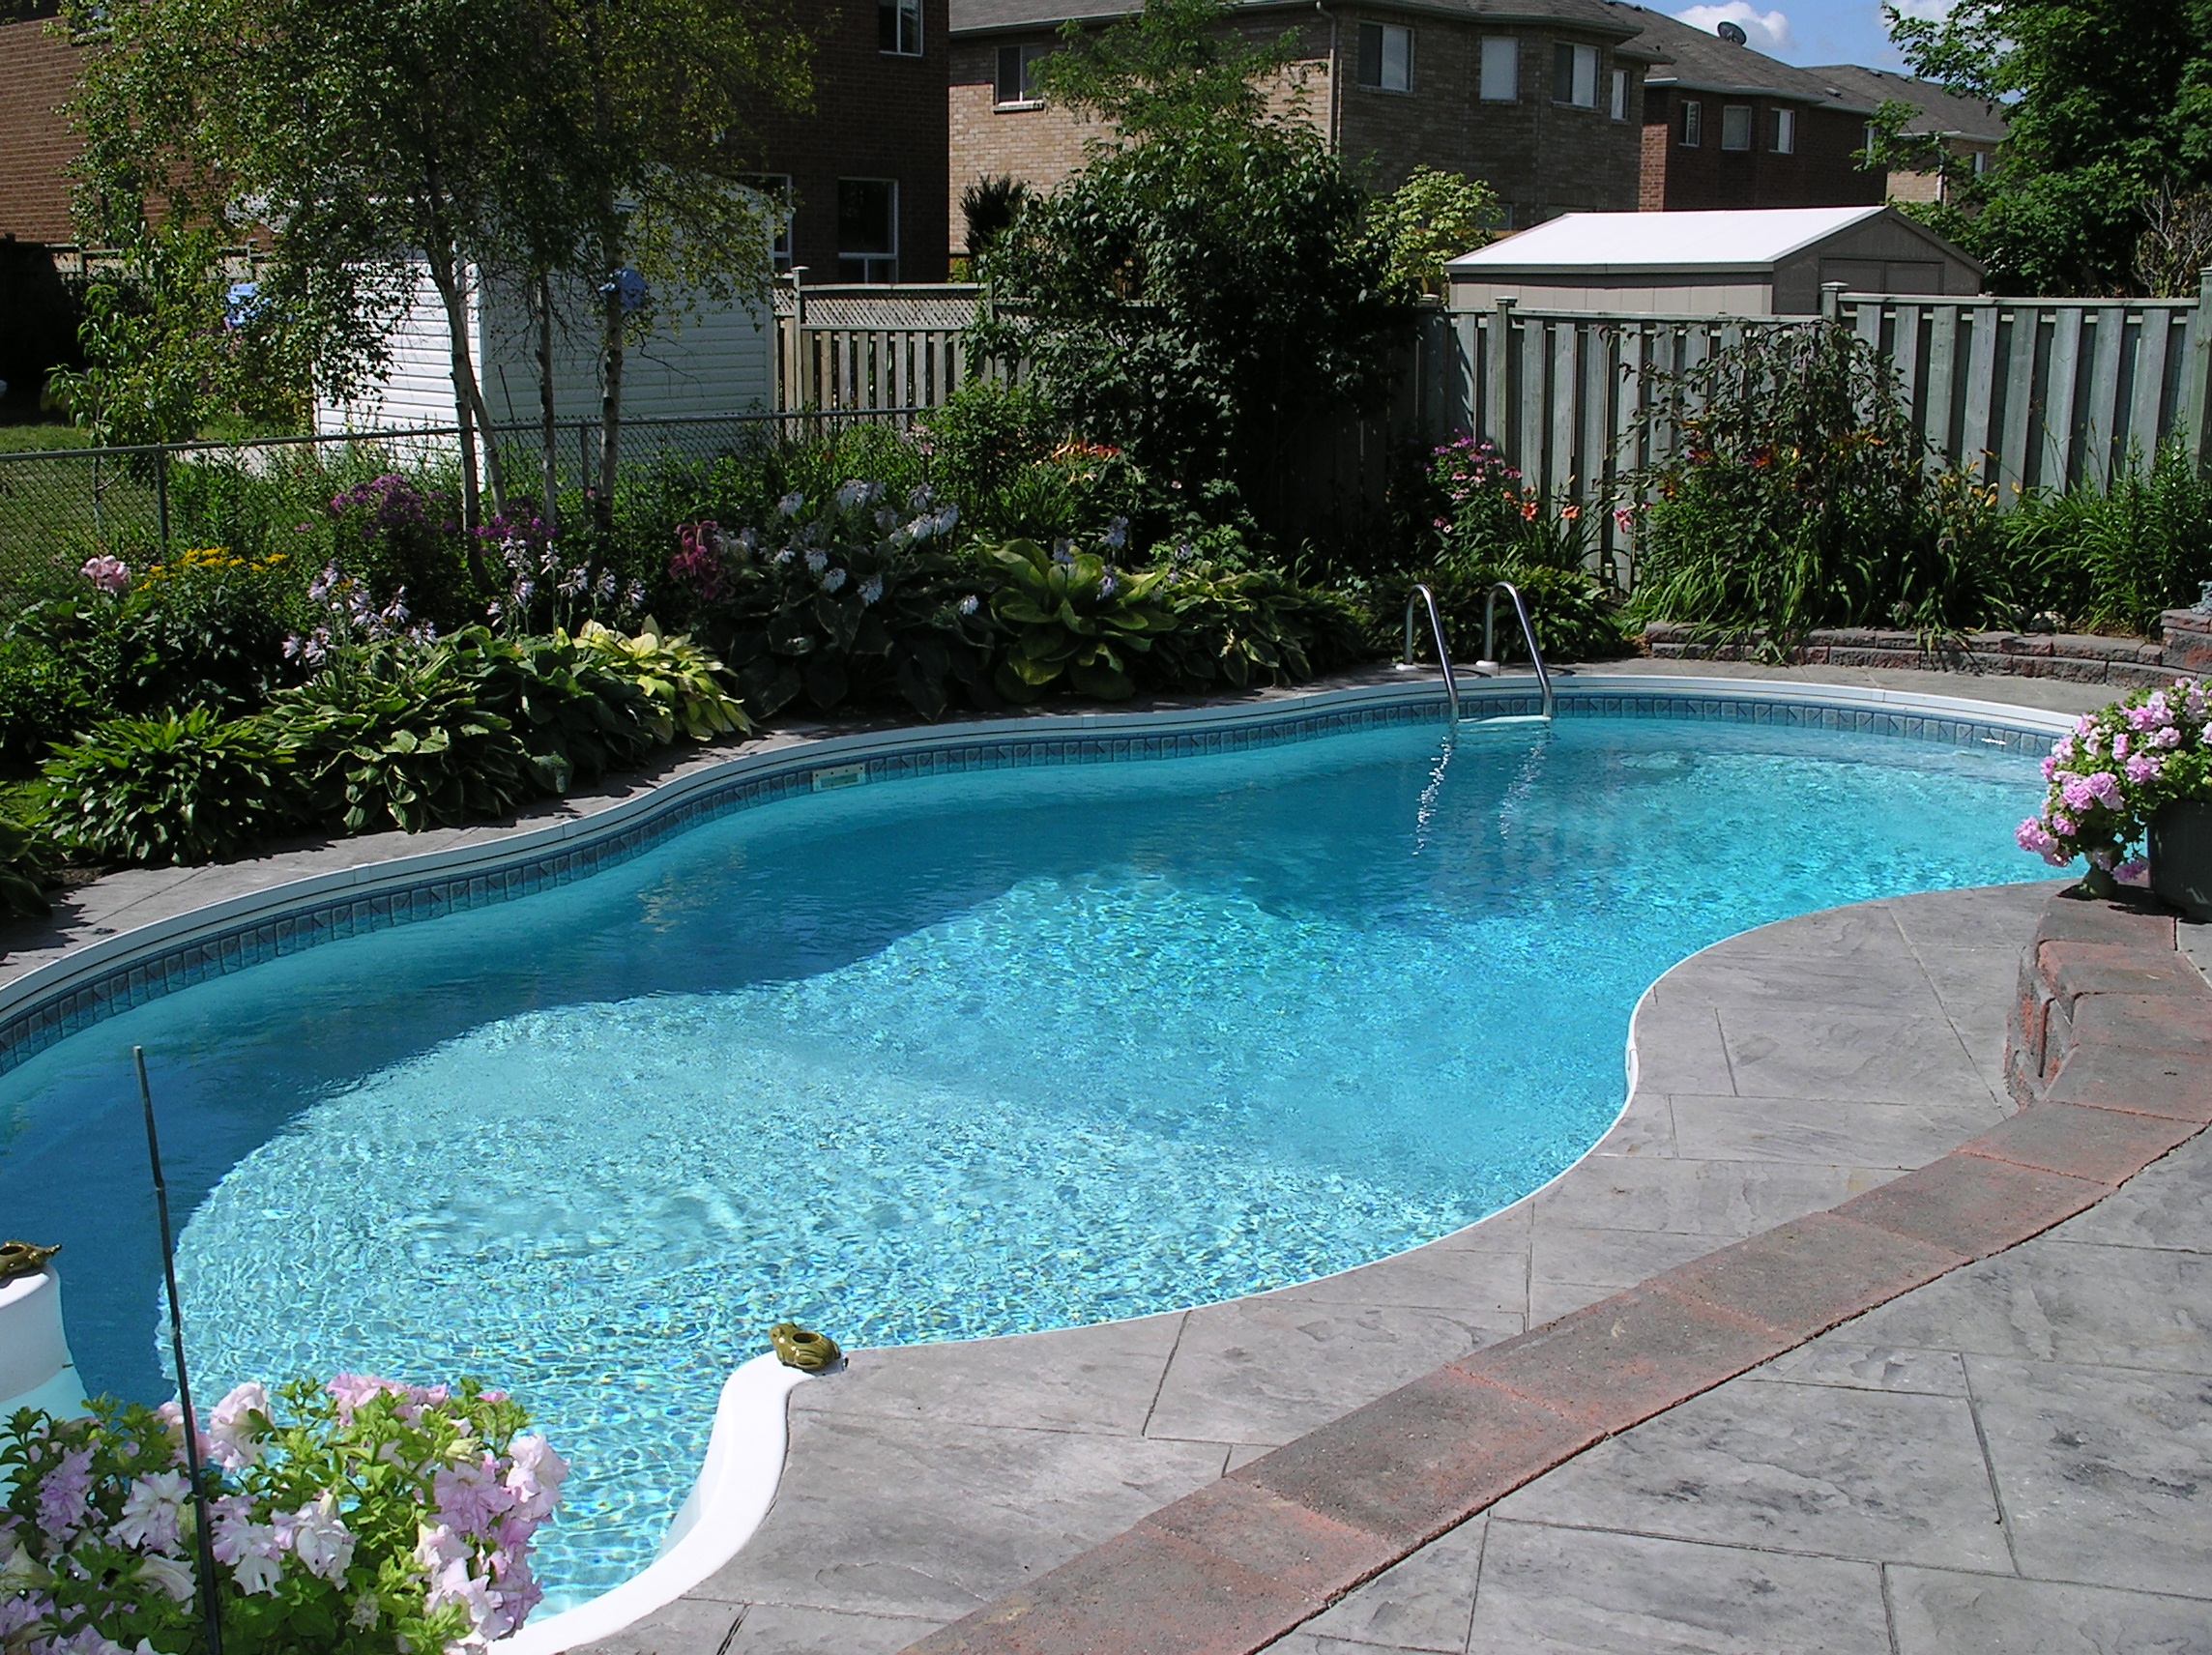 You Can Now RENT Backyard Pools Airbnb-Style Around Vancouver